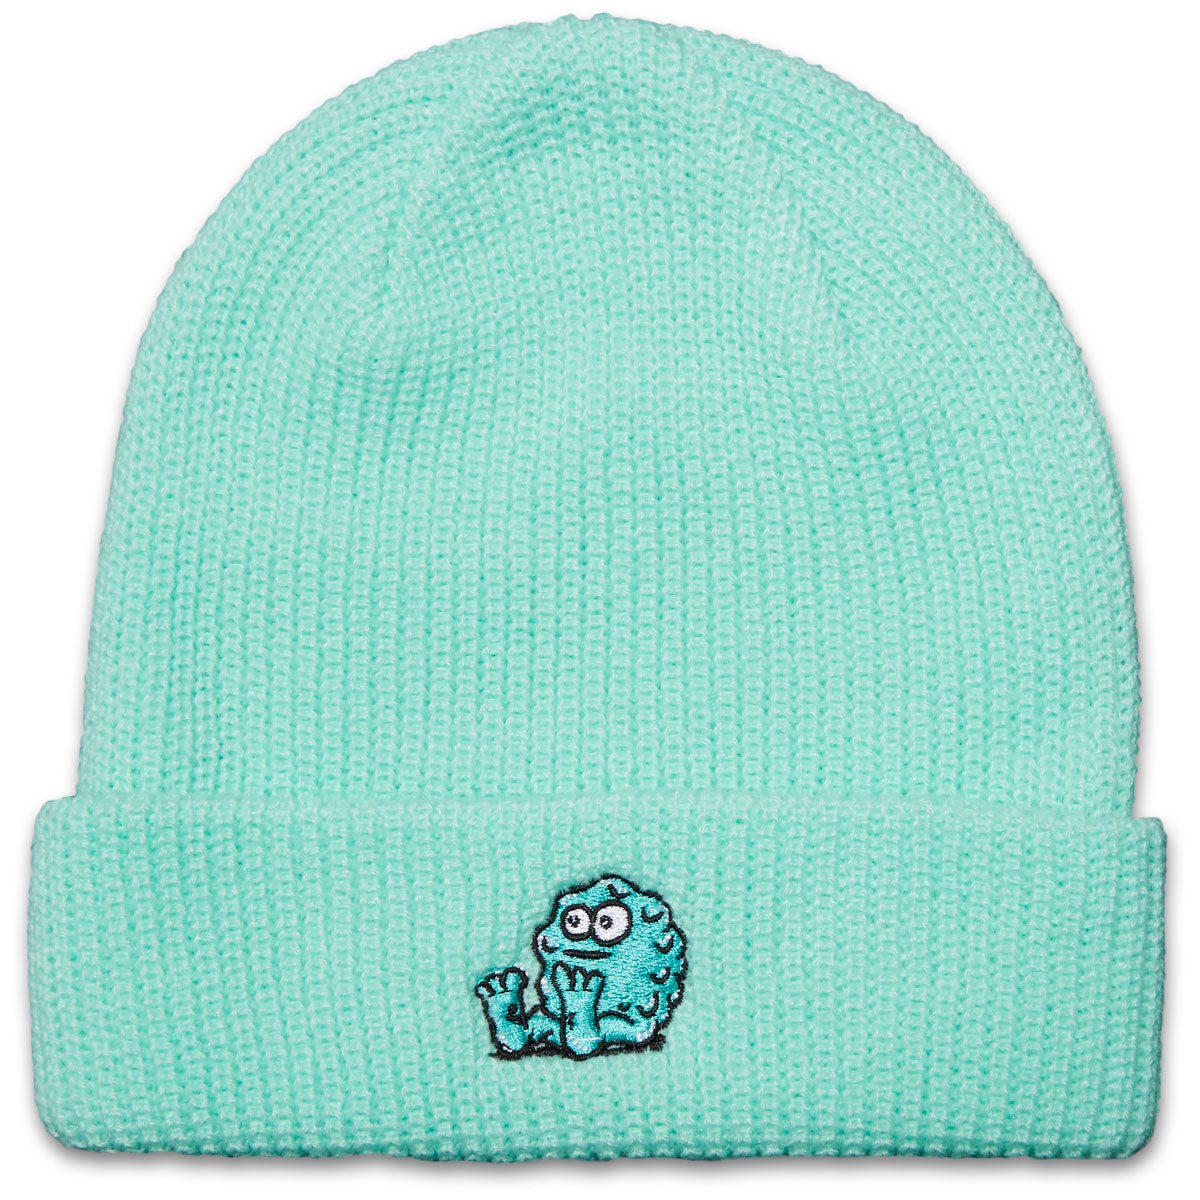 Snot Booger Logo Beanie - Teal image 1